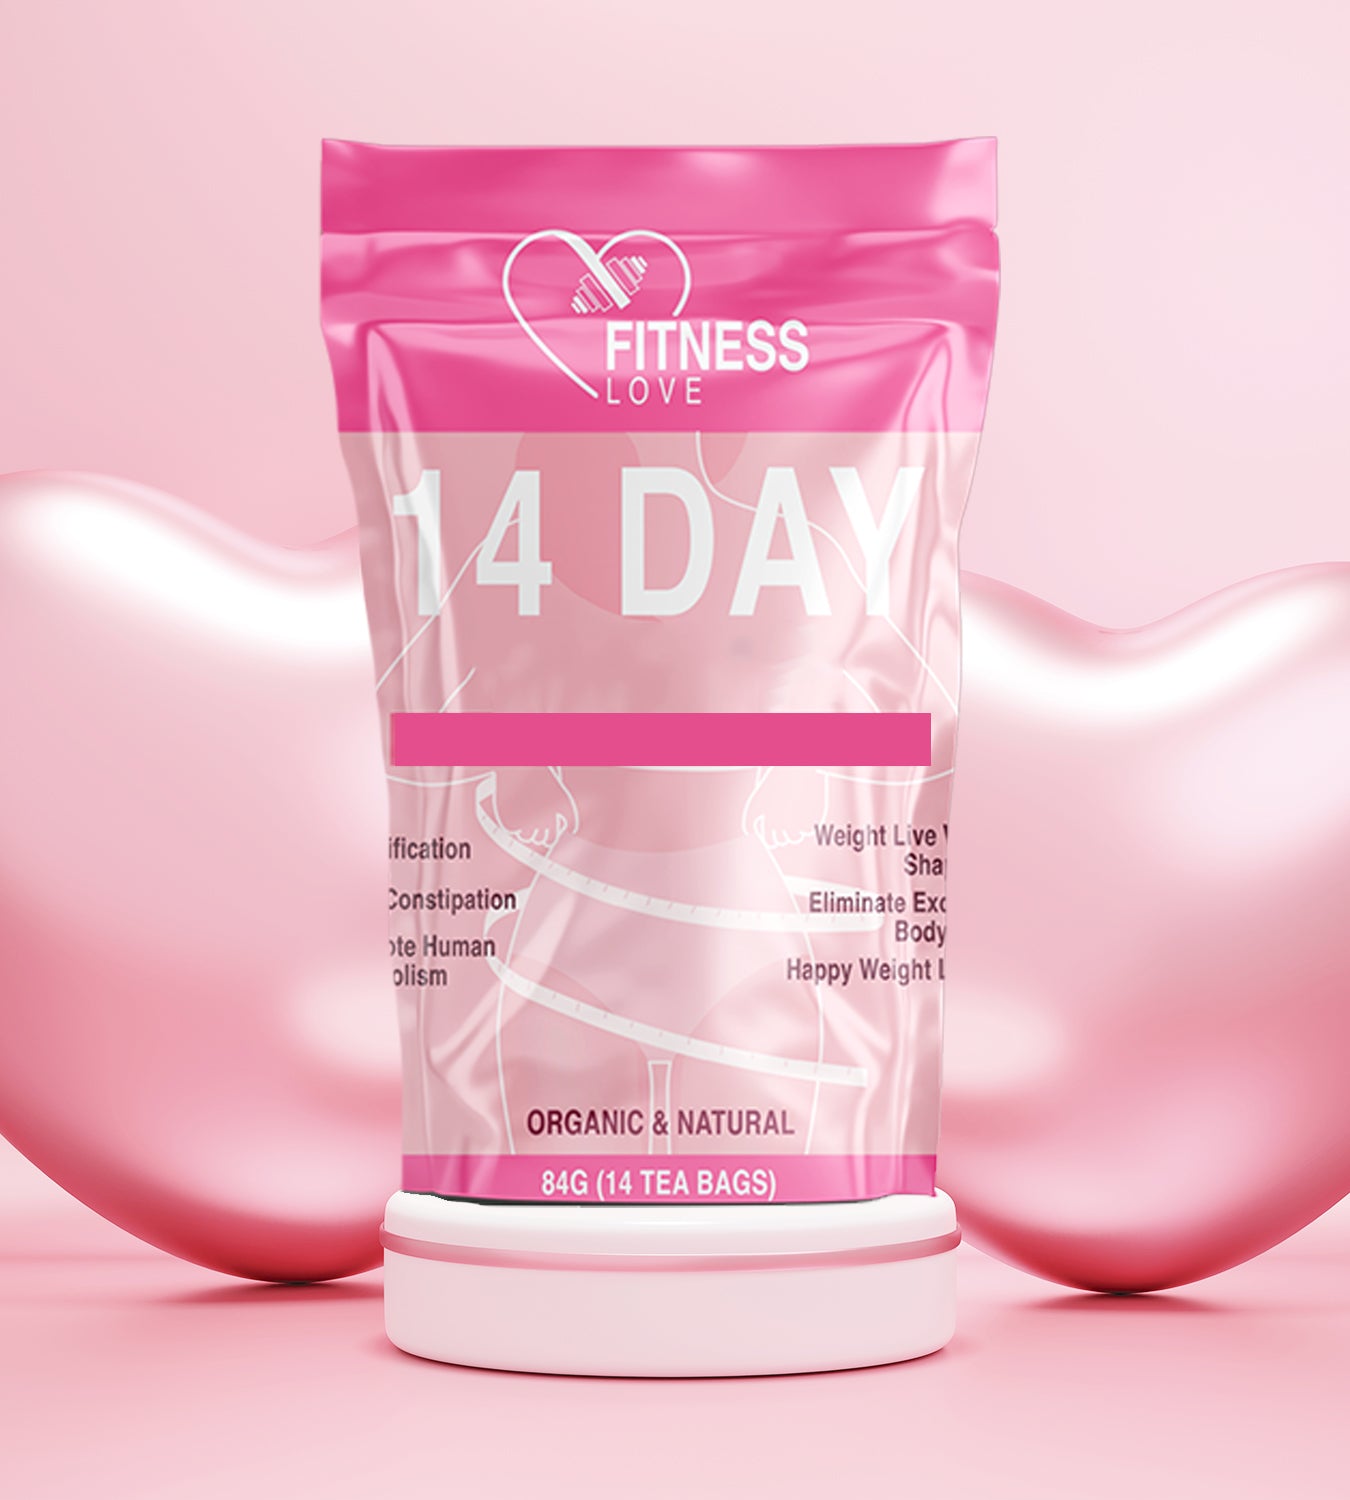 14 DAY FITNESS LOVE